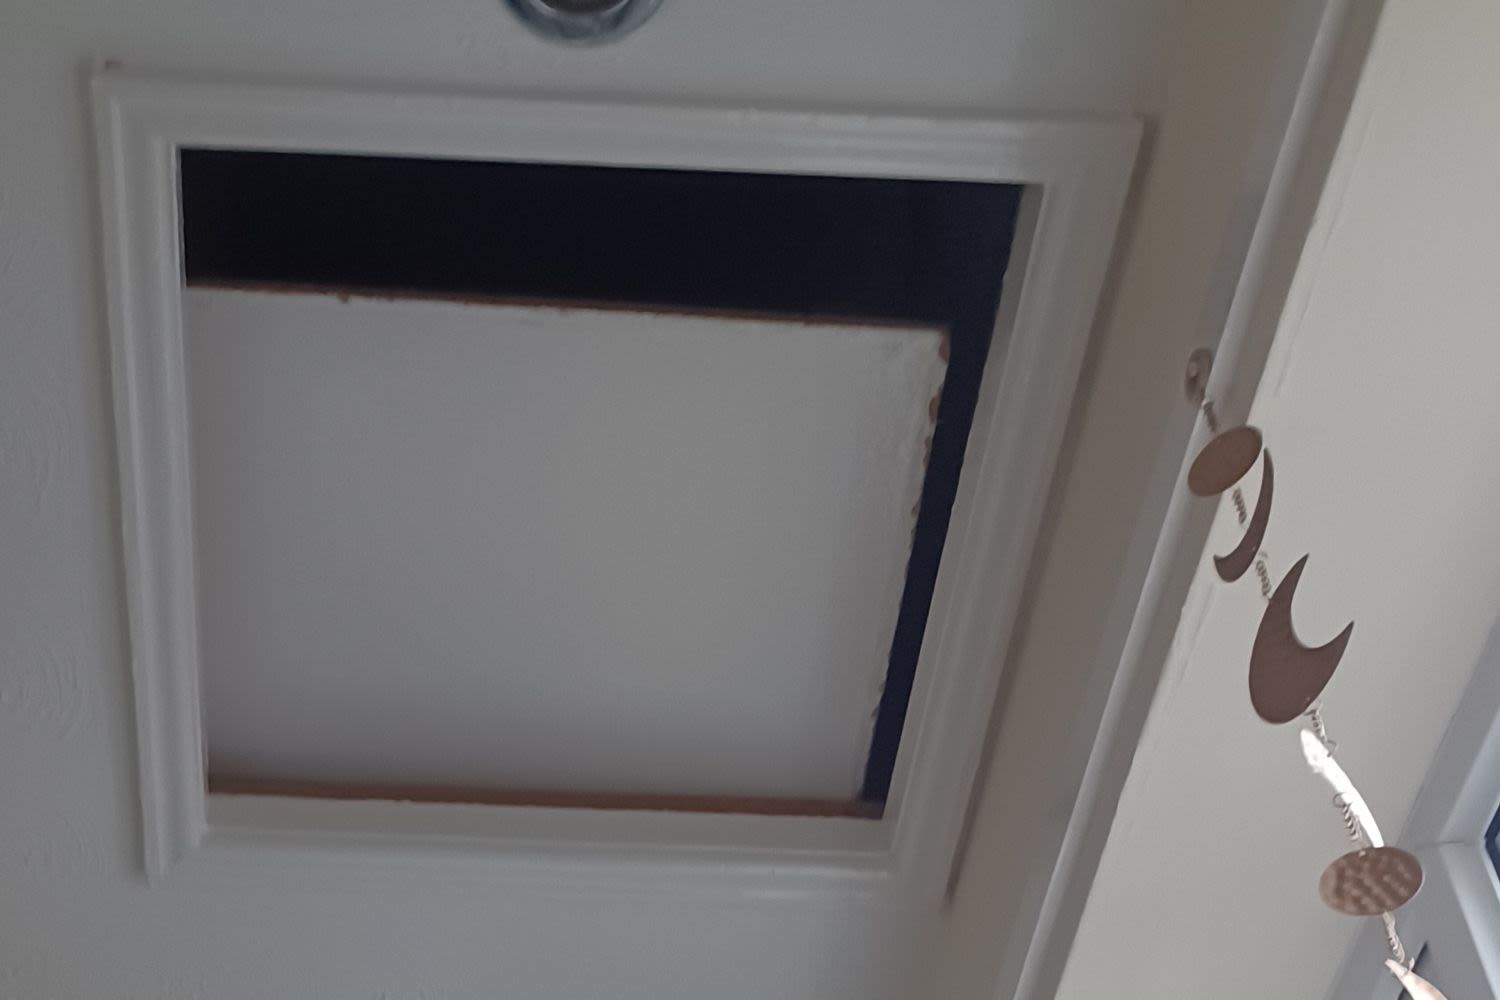 Renter Says Her ‘Heart Sank’ After Returning Home to Find Her Attic Door Mysteriously Open...